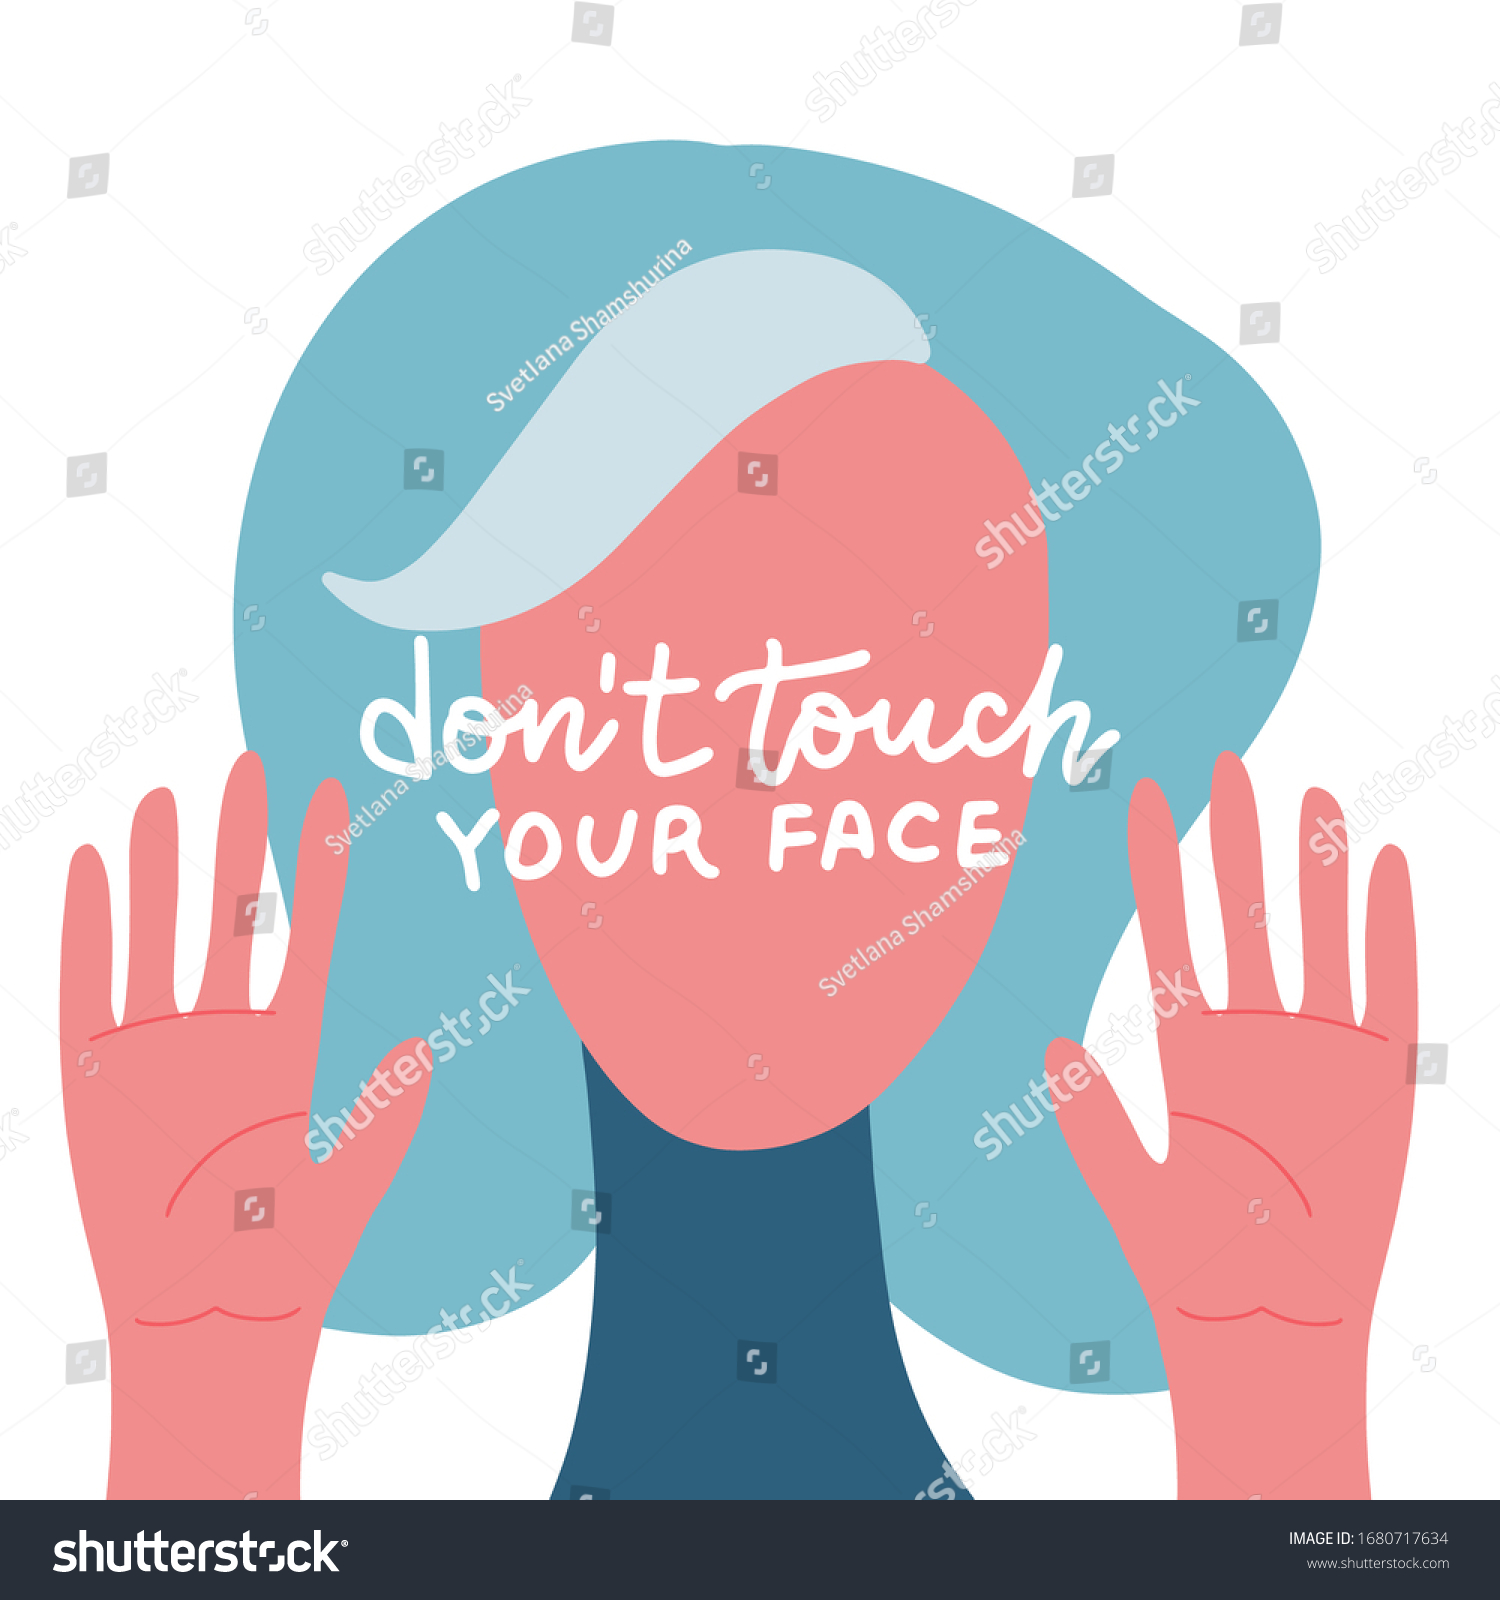 SVG of Prohibition of touching the face. Woman's face with raised hands and lettering inscription on her face. Vector flat illustration. svg